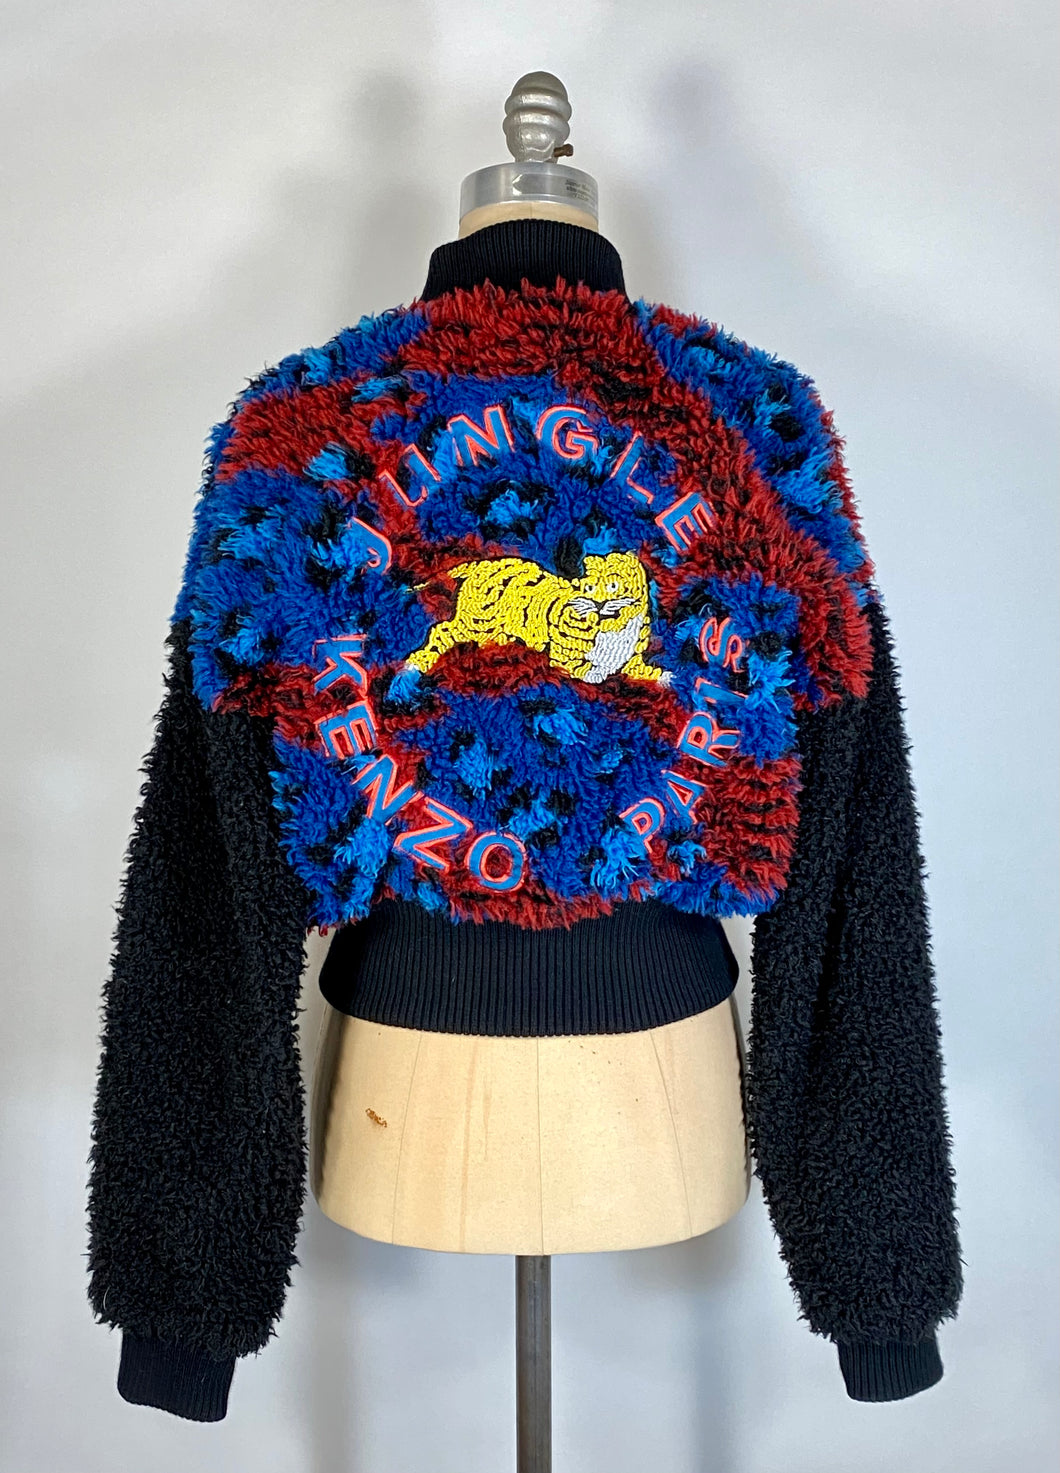 Modern KENZO x H&M faux shearling fur colorful bomber jacket w/TIGER embroidery